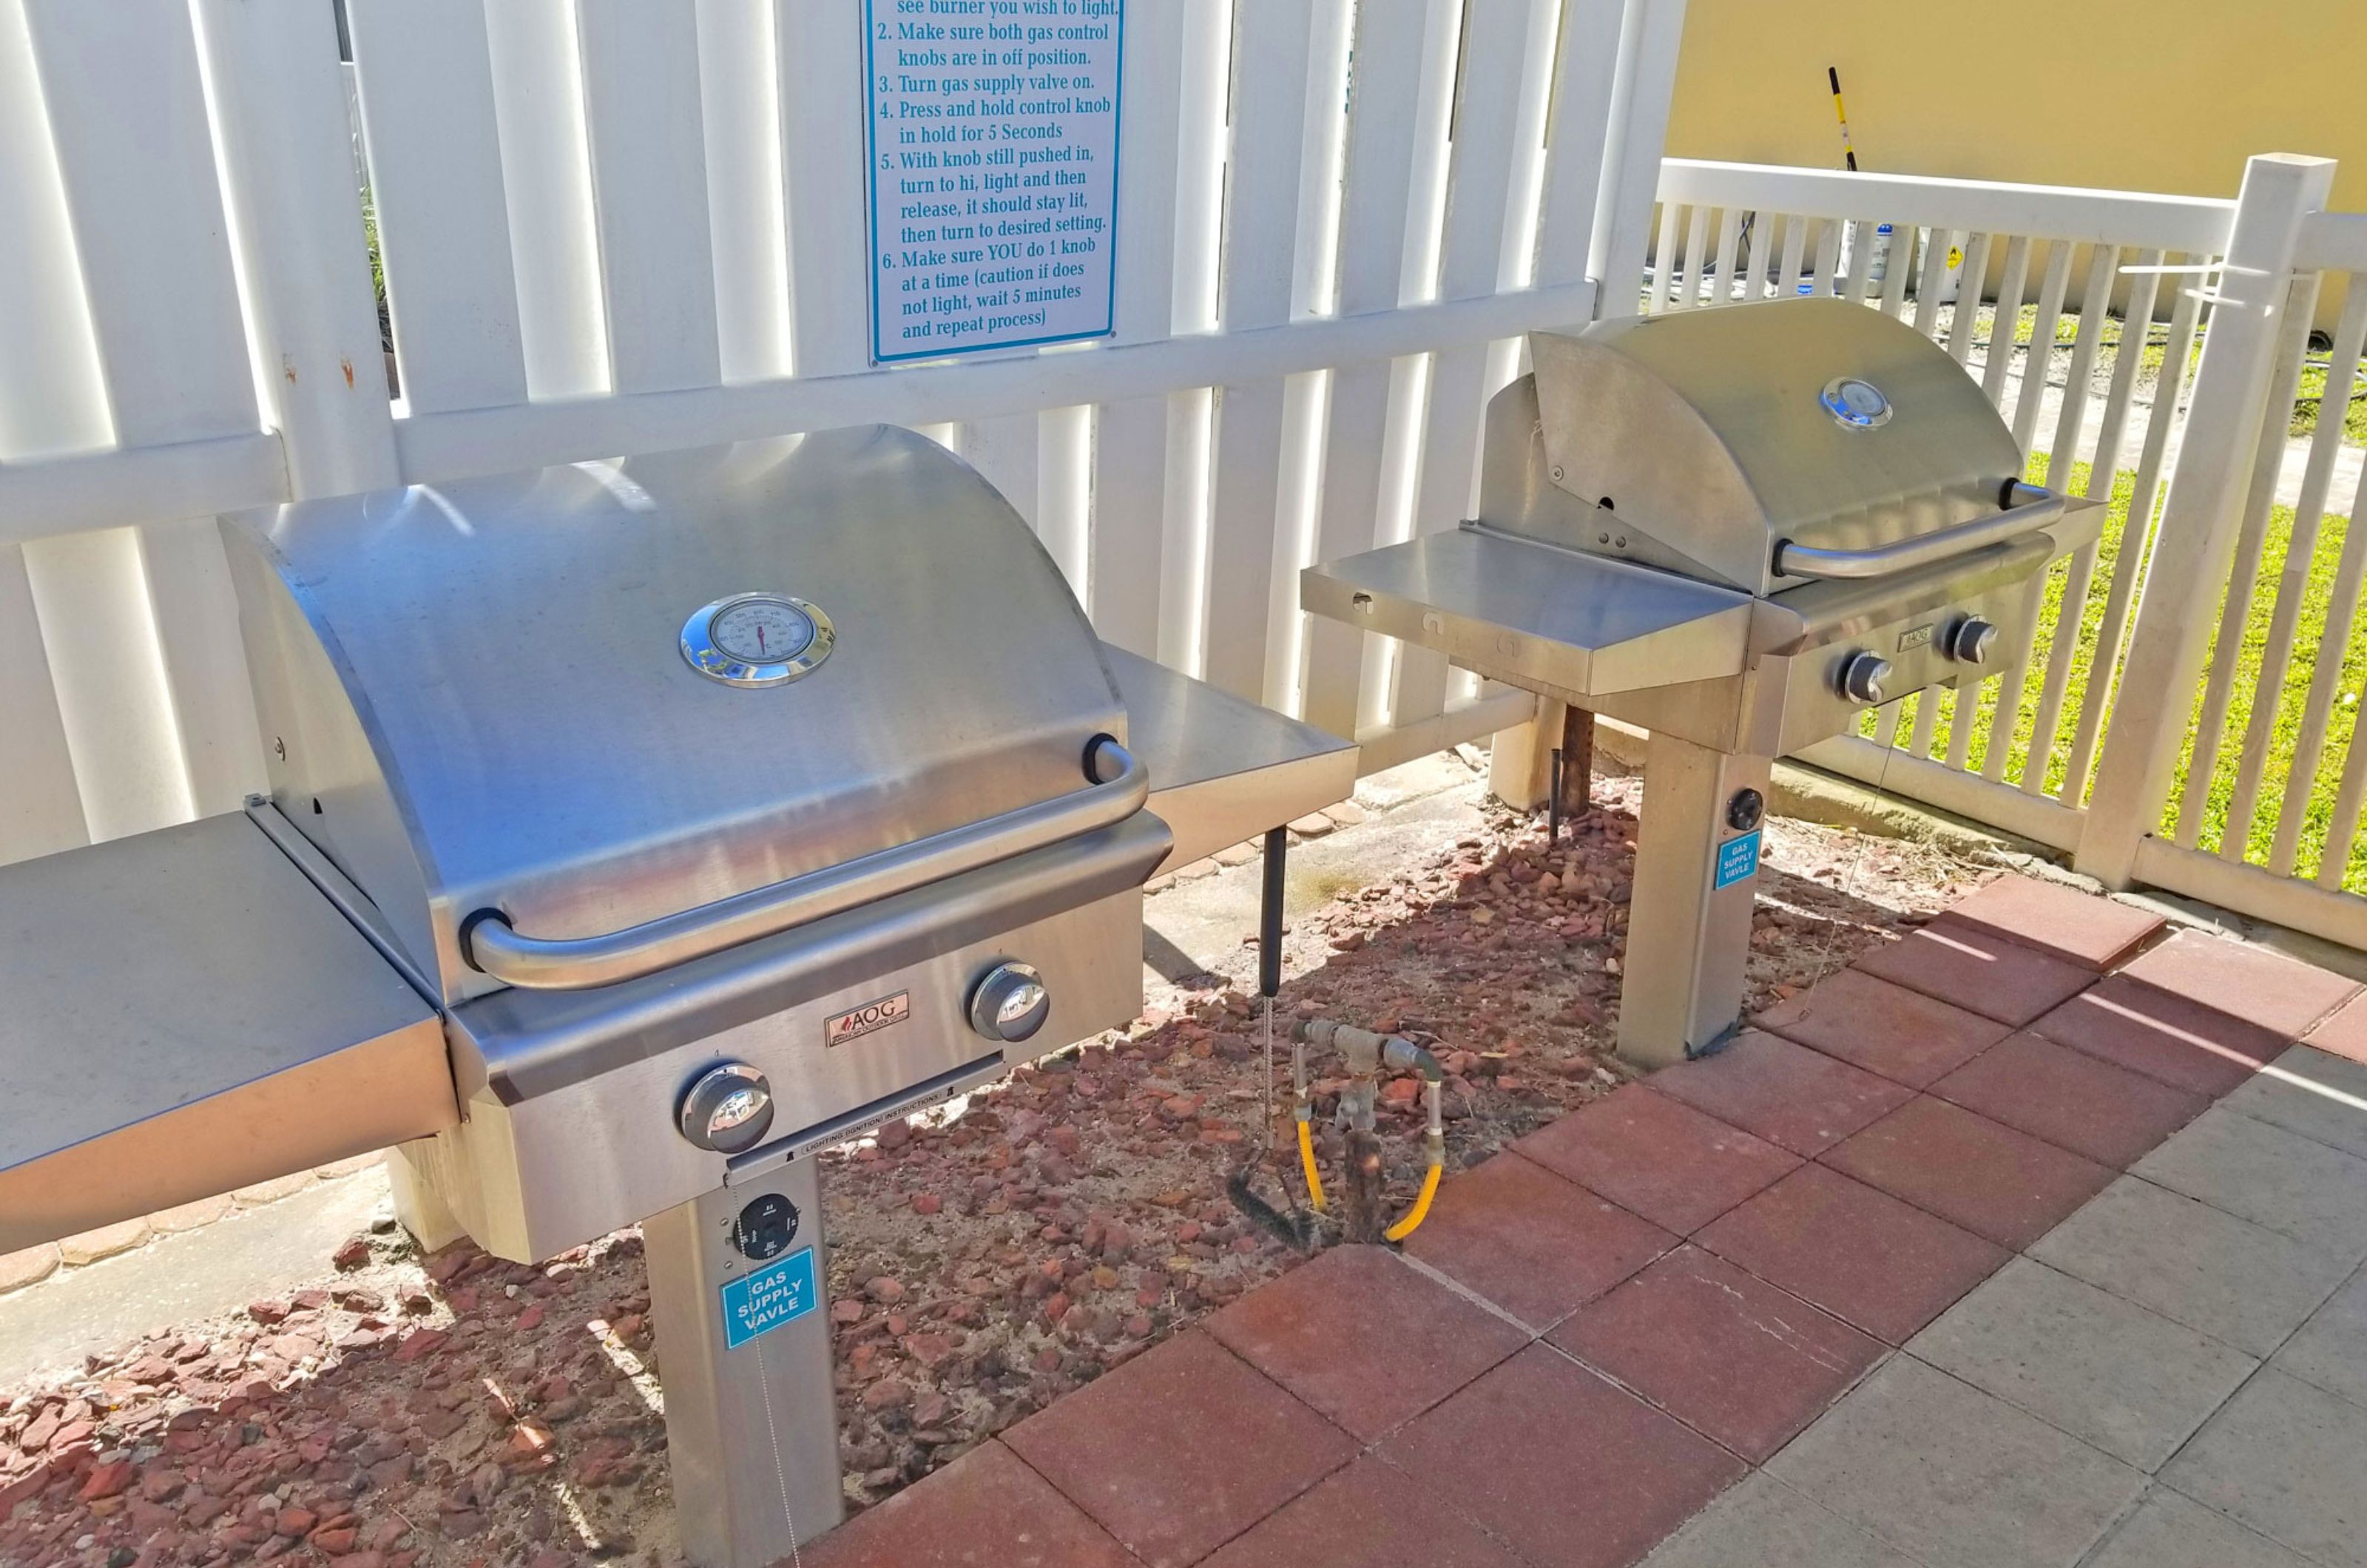 Community gas grills on an outdoor patio at the Pearl of Navarre 